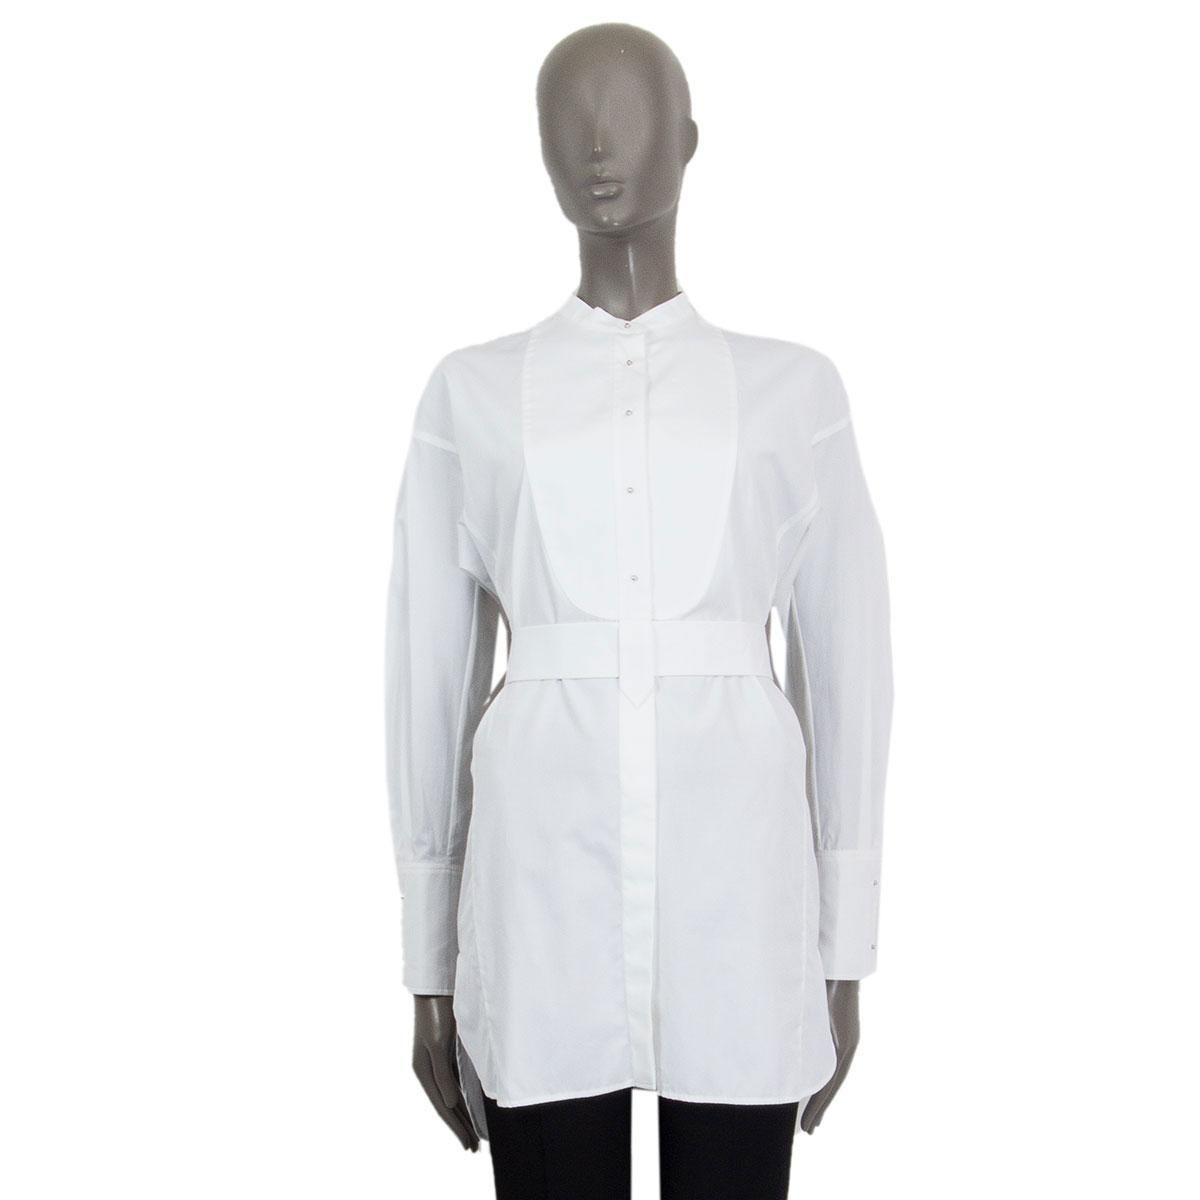 100% authentic Prada belted oversized shirt in white cotton (100%). Features half concealed buttons and round silver-tone metal buttons at top part. Stand-up collar, striking cuffs and a slightly longer back. Brand new. 

Tag Size 38
Size